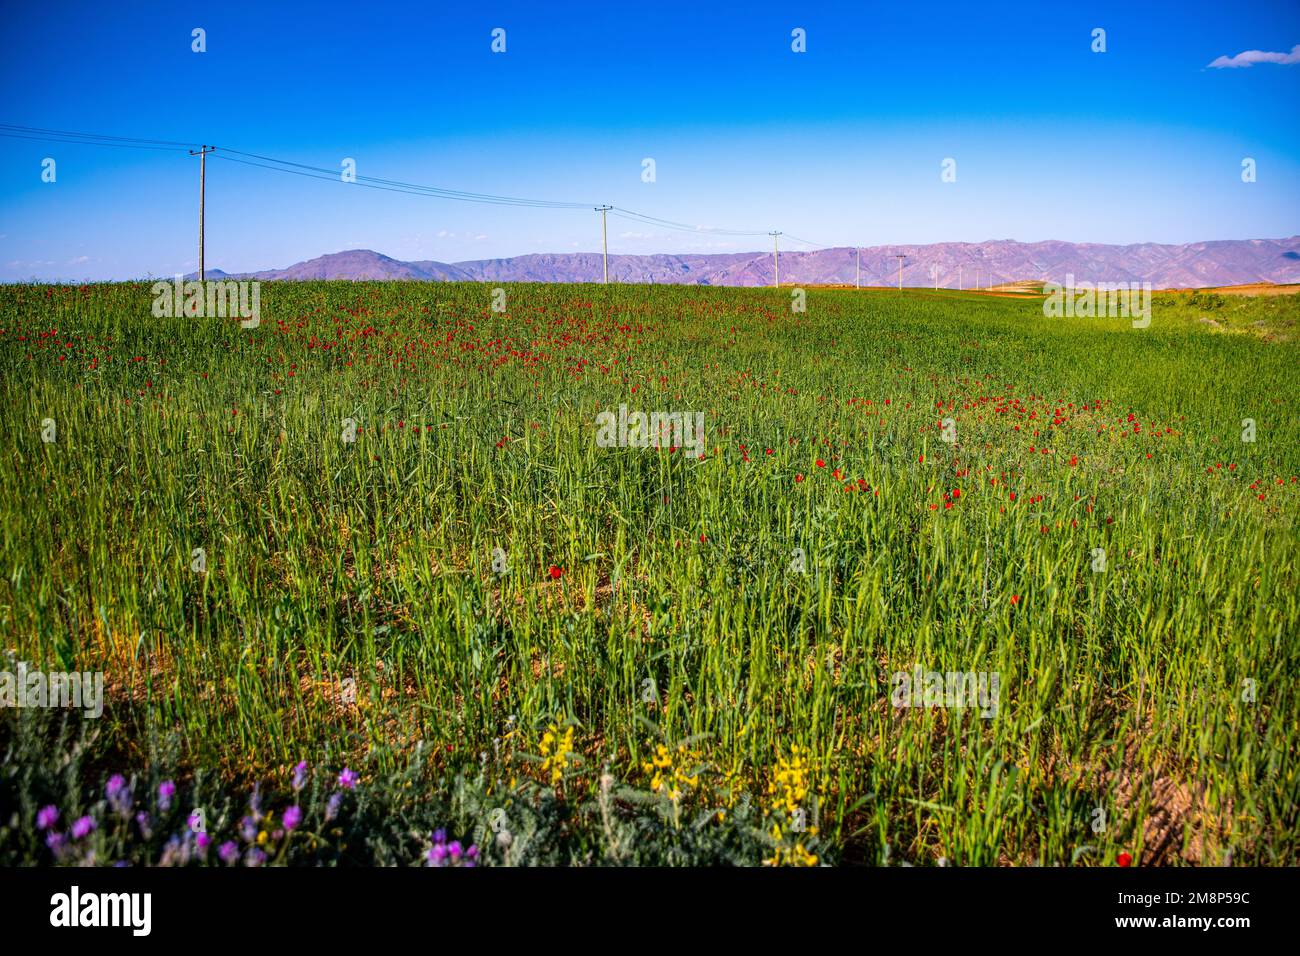 A scenic view of green poppy flowers field on a sunny day Stock Photo